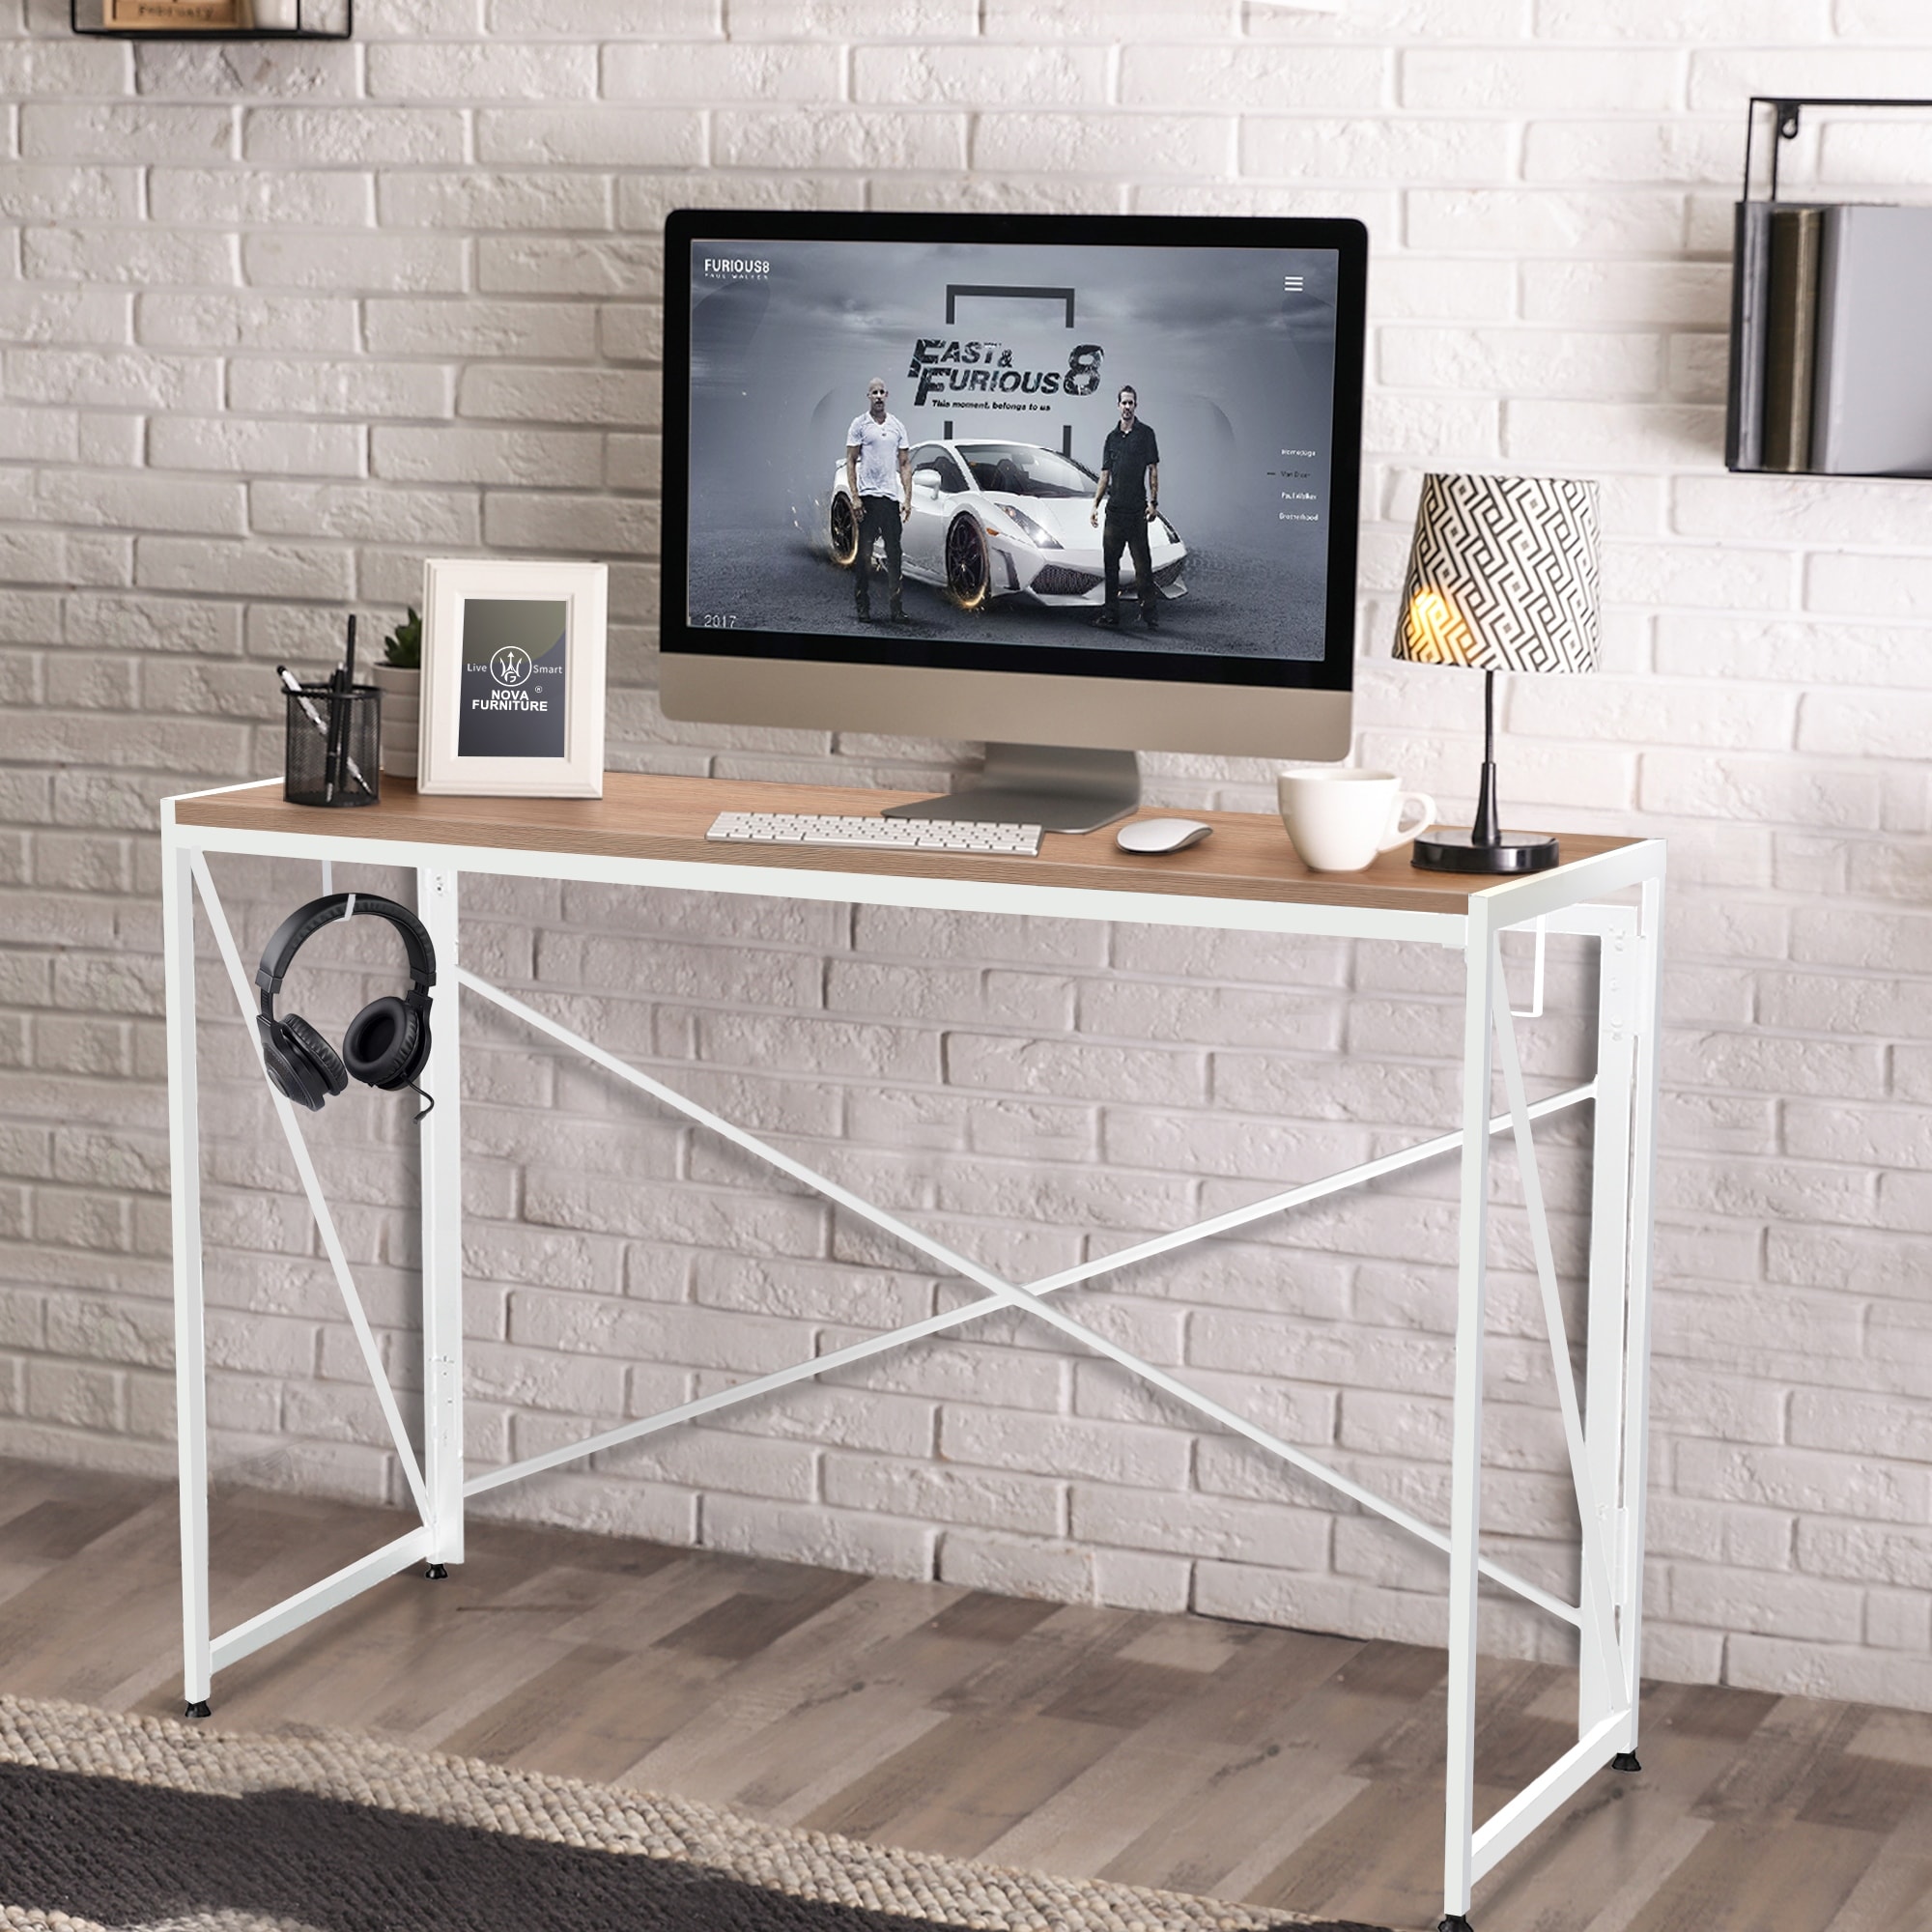 Smart computer table for small spaces